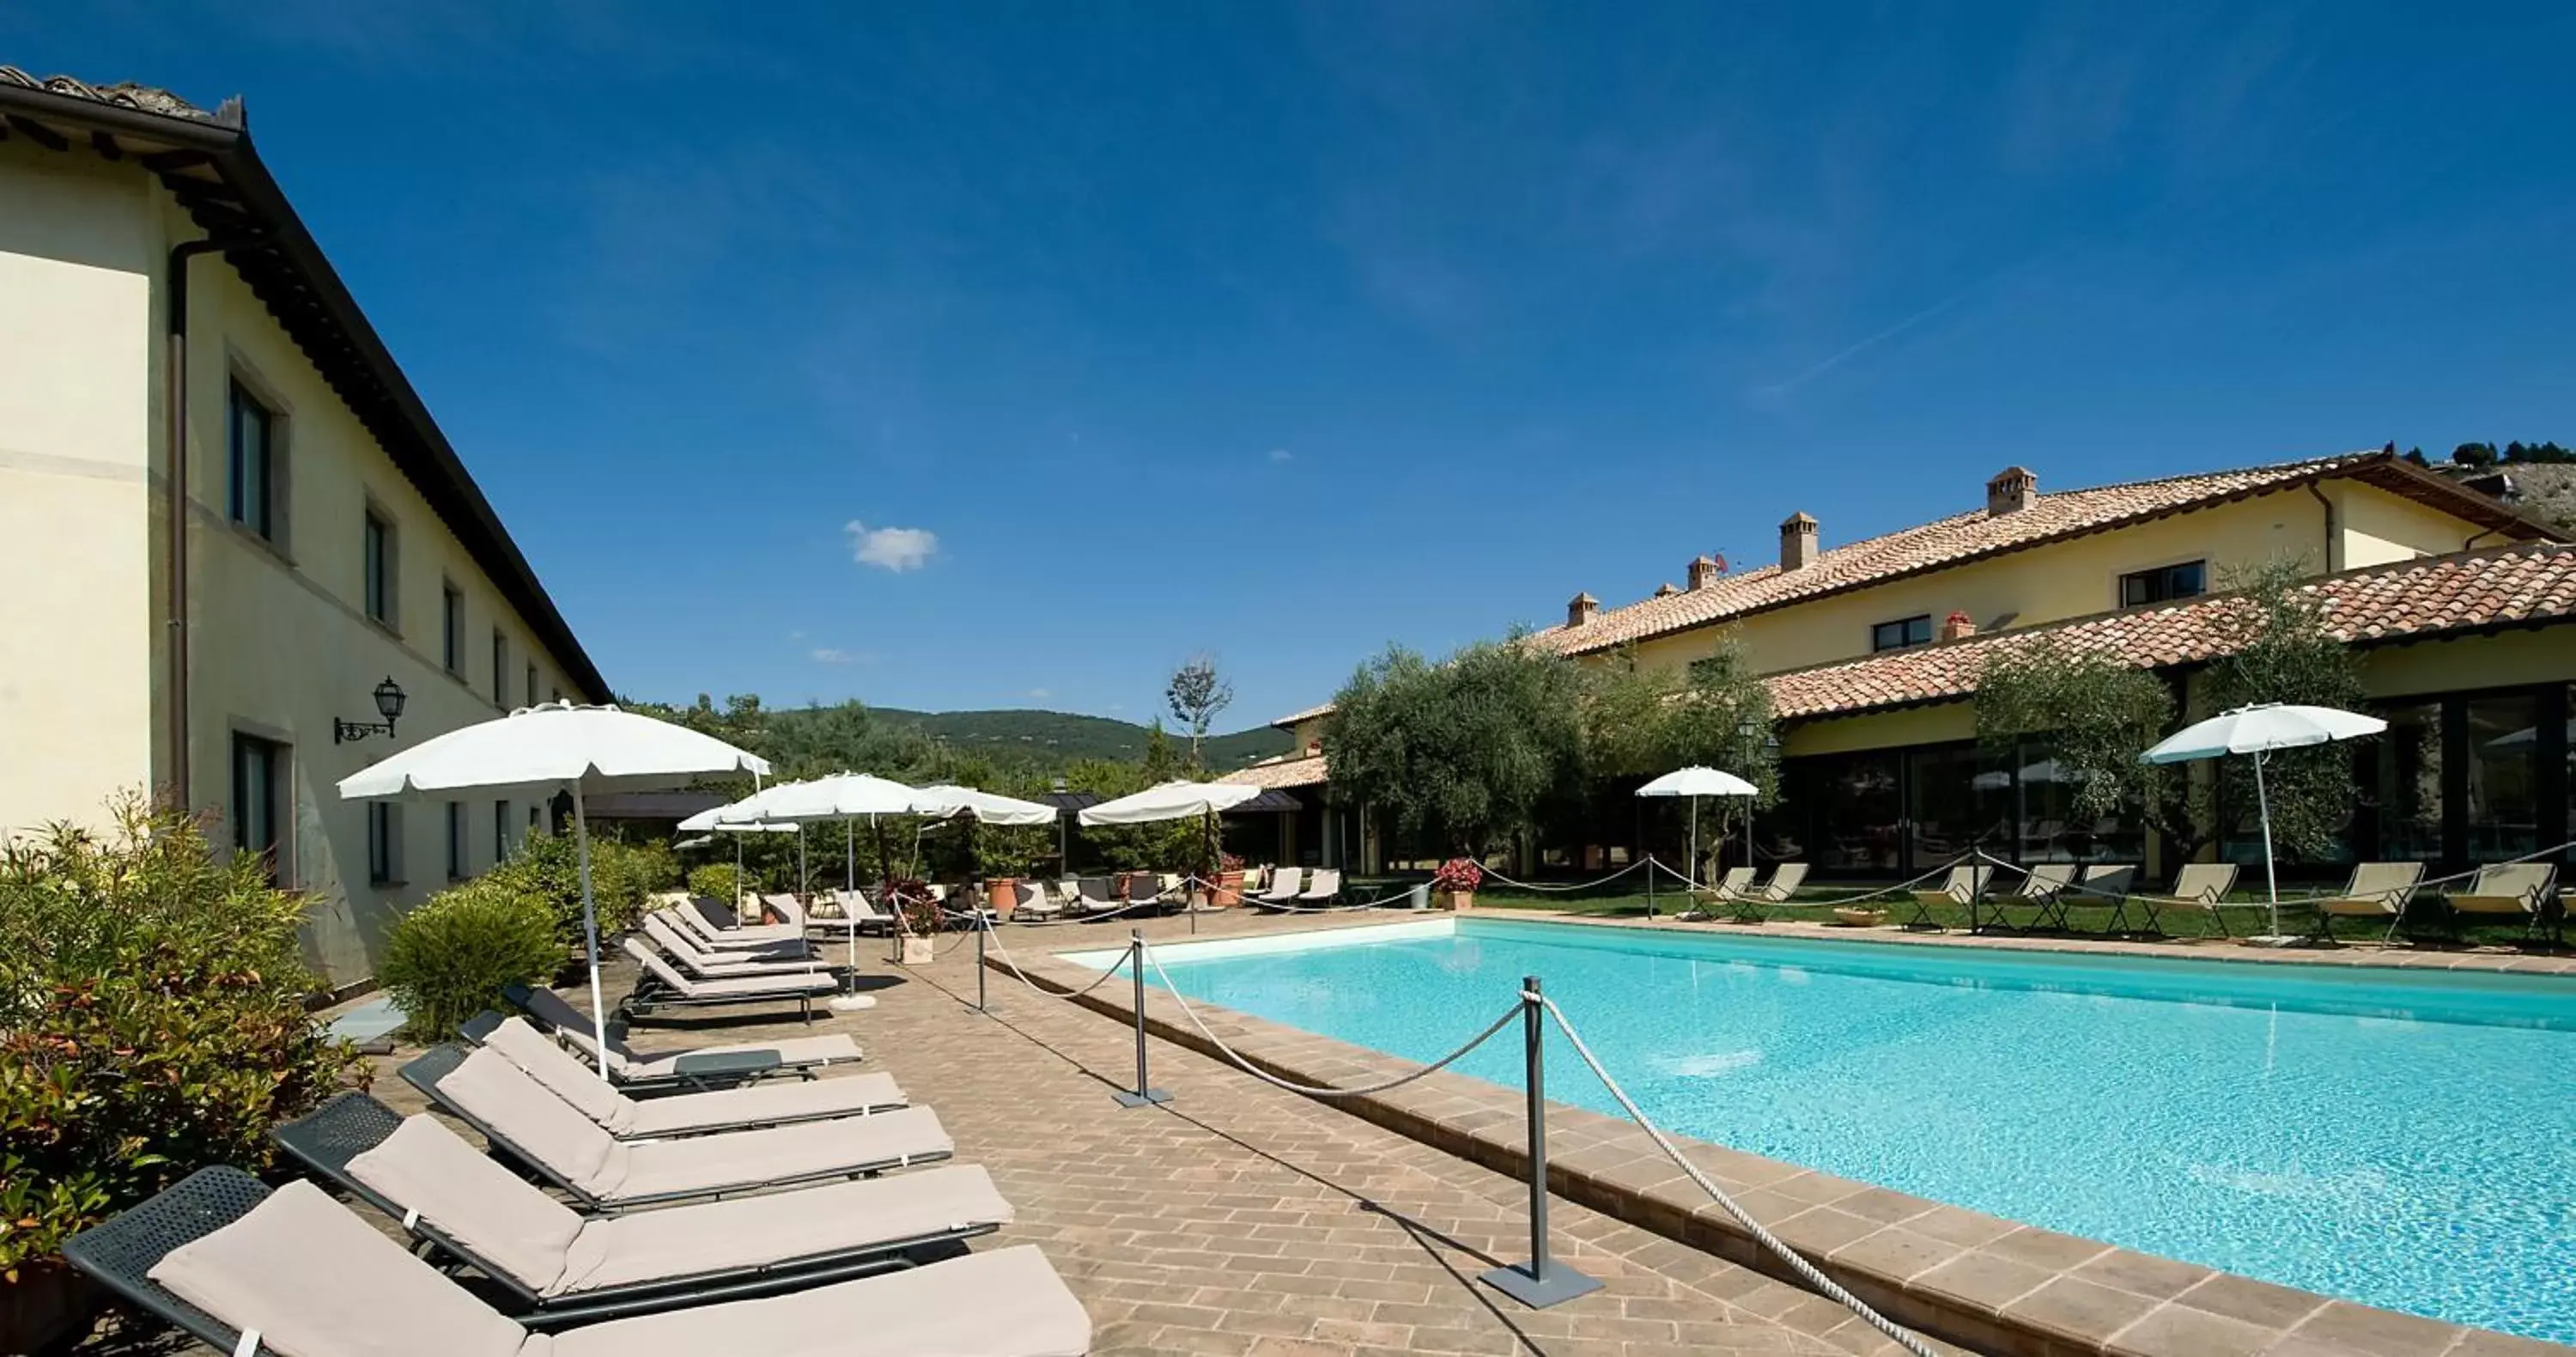 Swimming Pool in Relais dell'Olmo